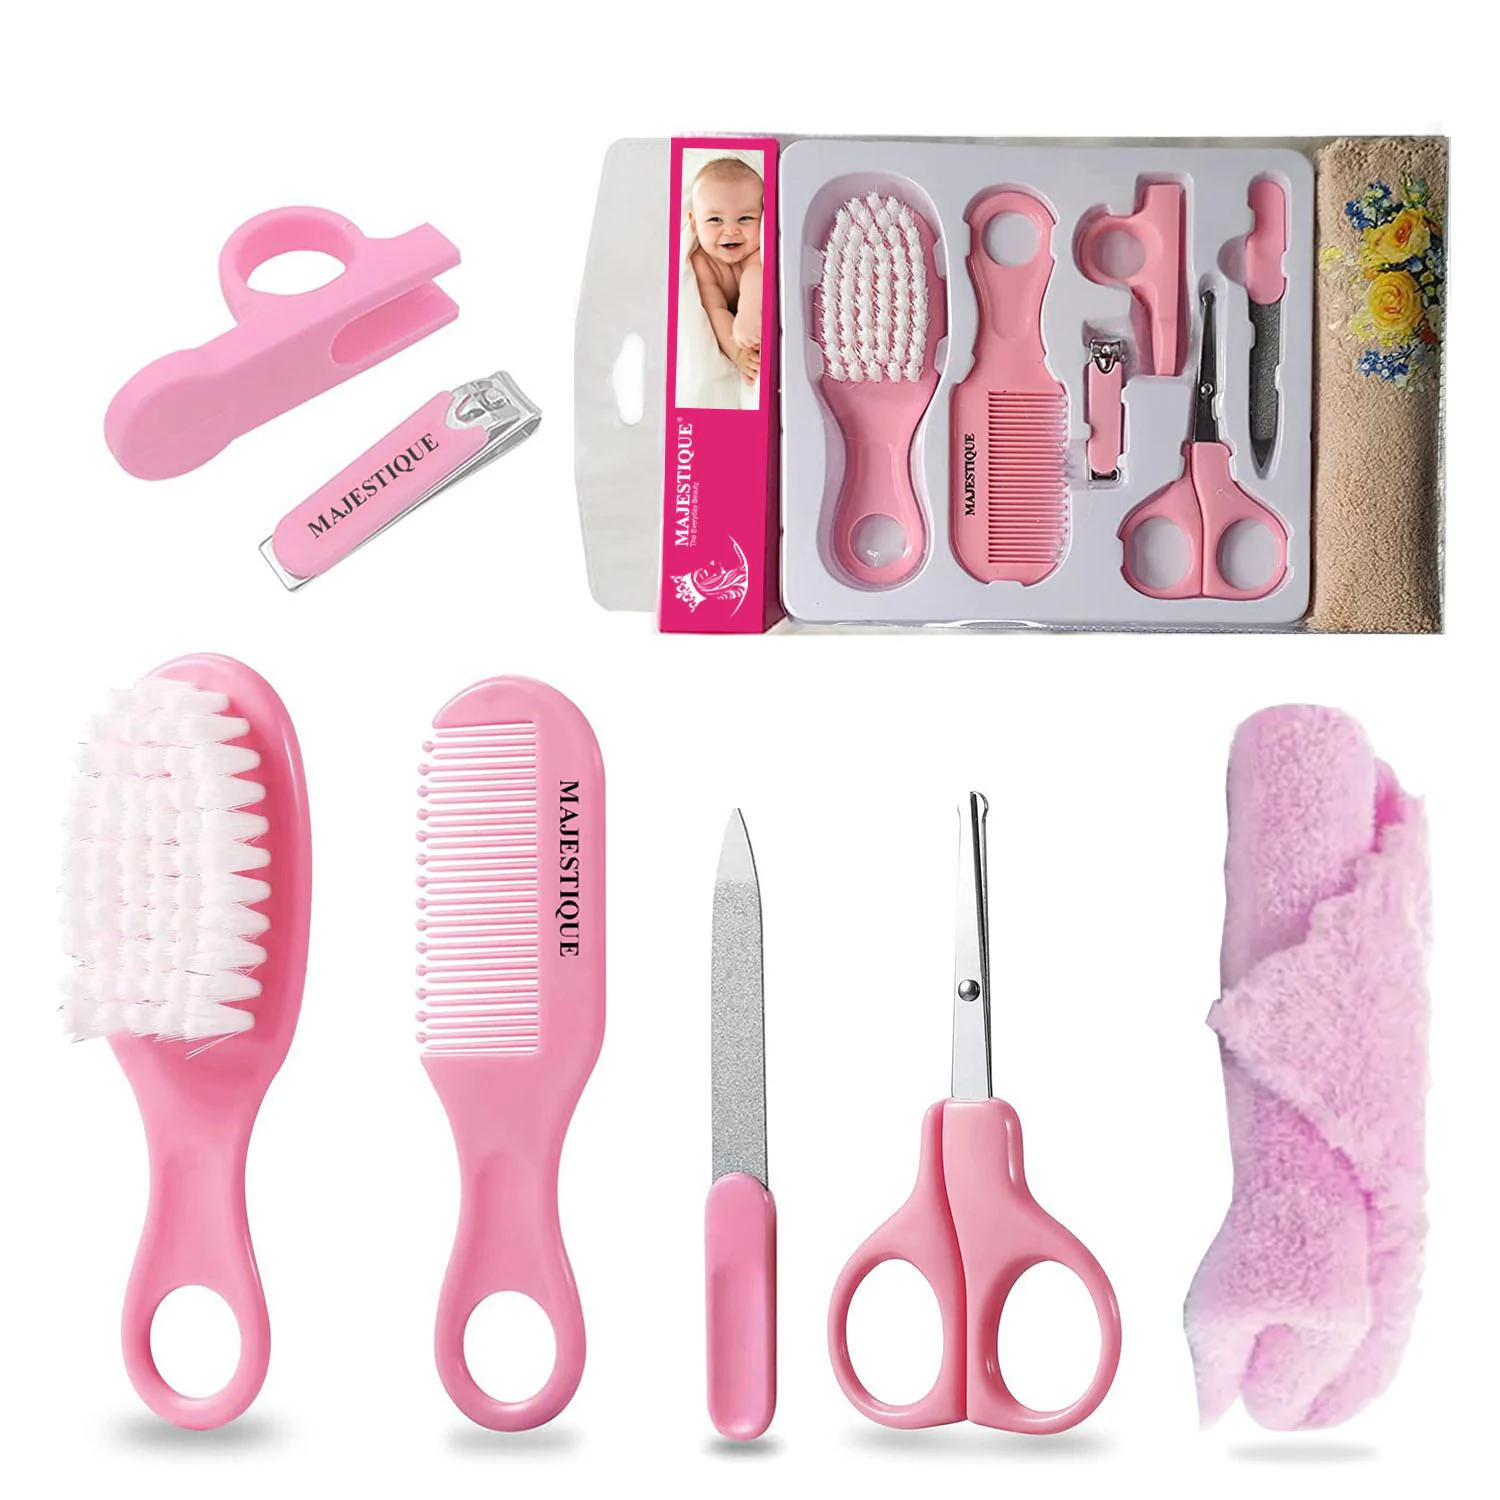 Majestique Baby Grooming Set - Baby Hair Brush, Comb, Nail Clipper, Nail  File and Soft Baby Towel, Baby Products for New Born Baby Gifts Toddlers  Infant Girl Boys Keep Clean (7 in